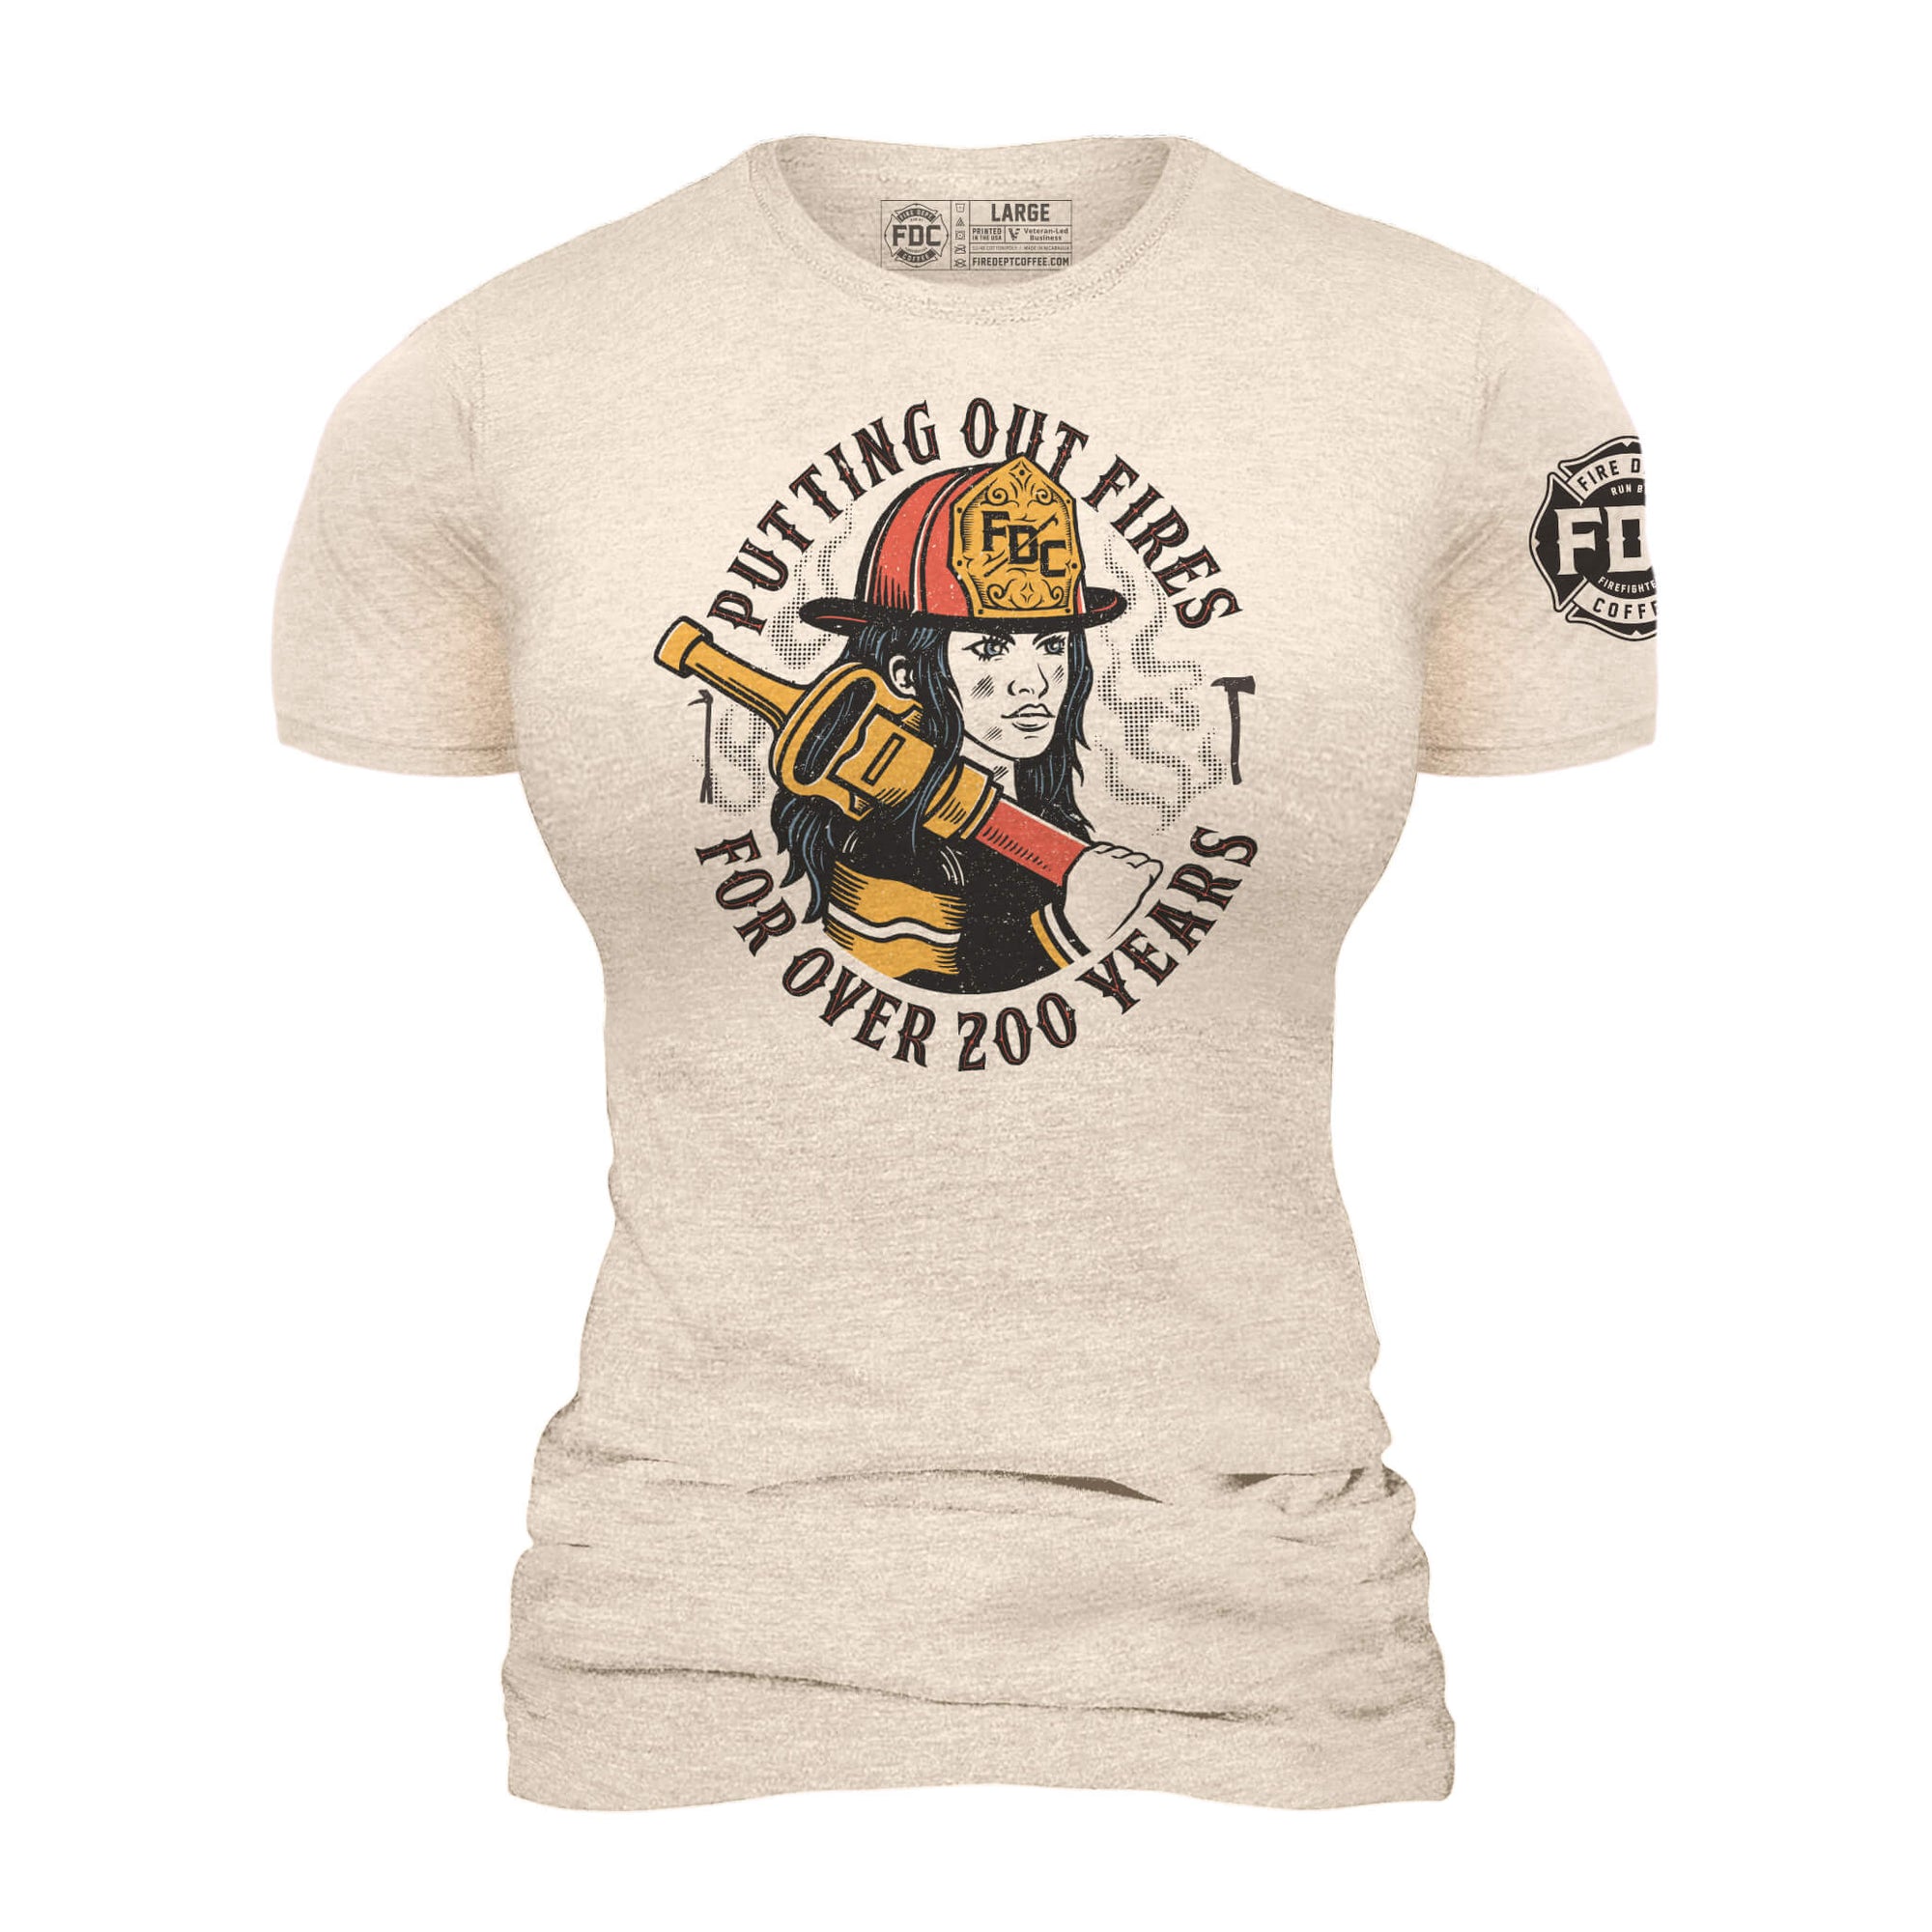 Image of a cream colored shirt with a graphic of a female firefighter on the front of the shirt.